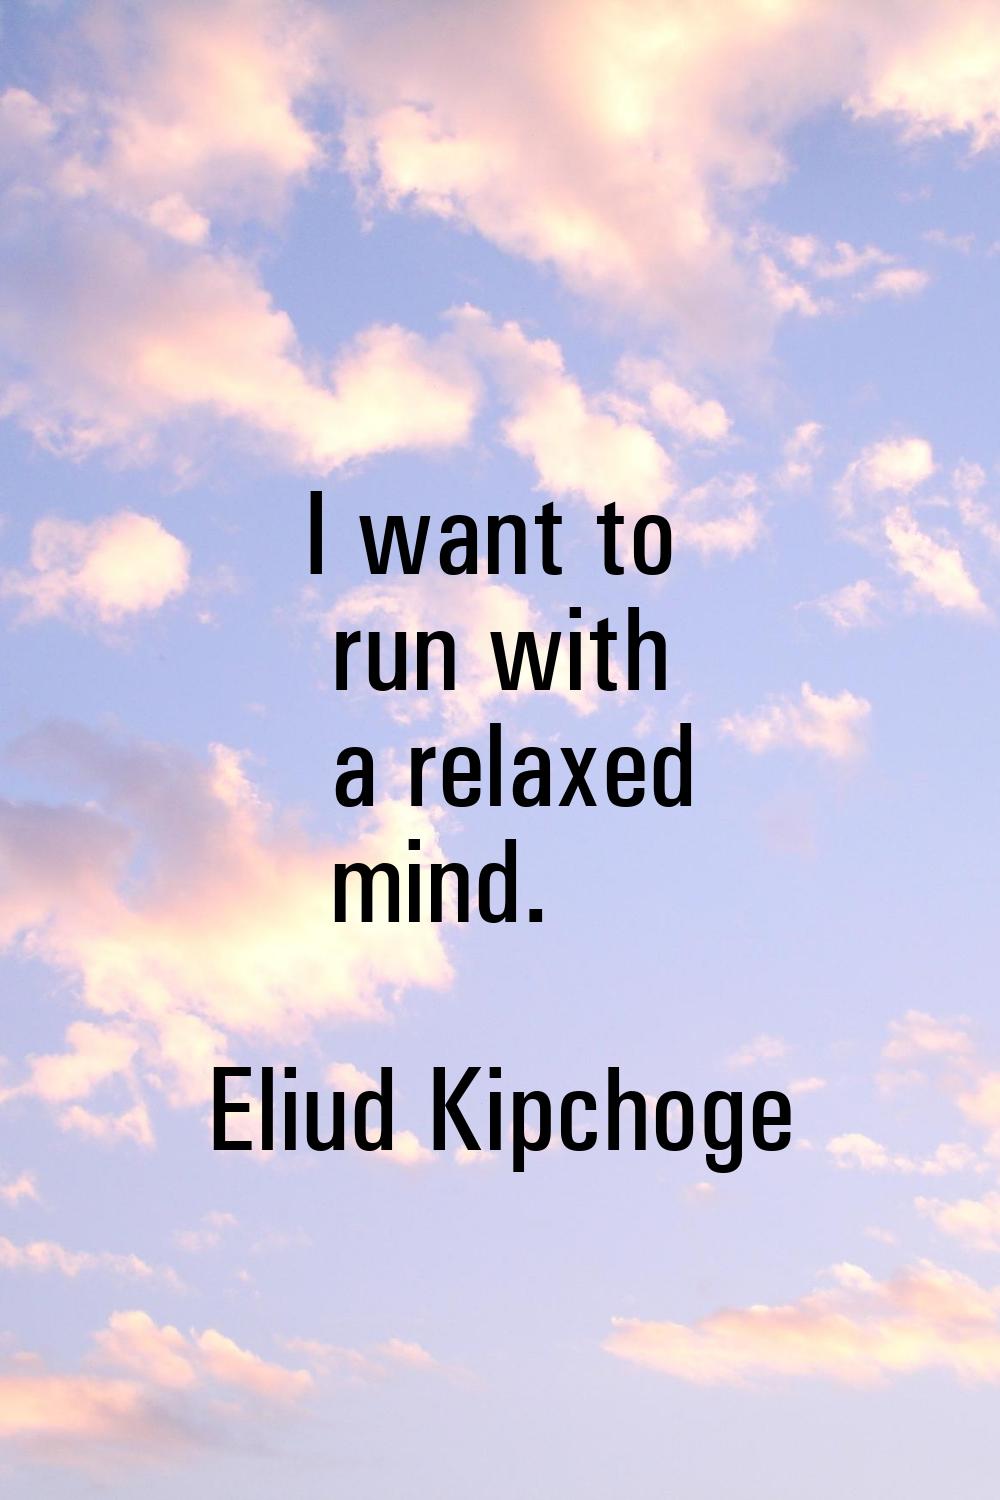 I want to run with a relaxed mind.